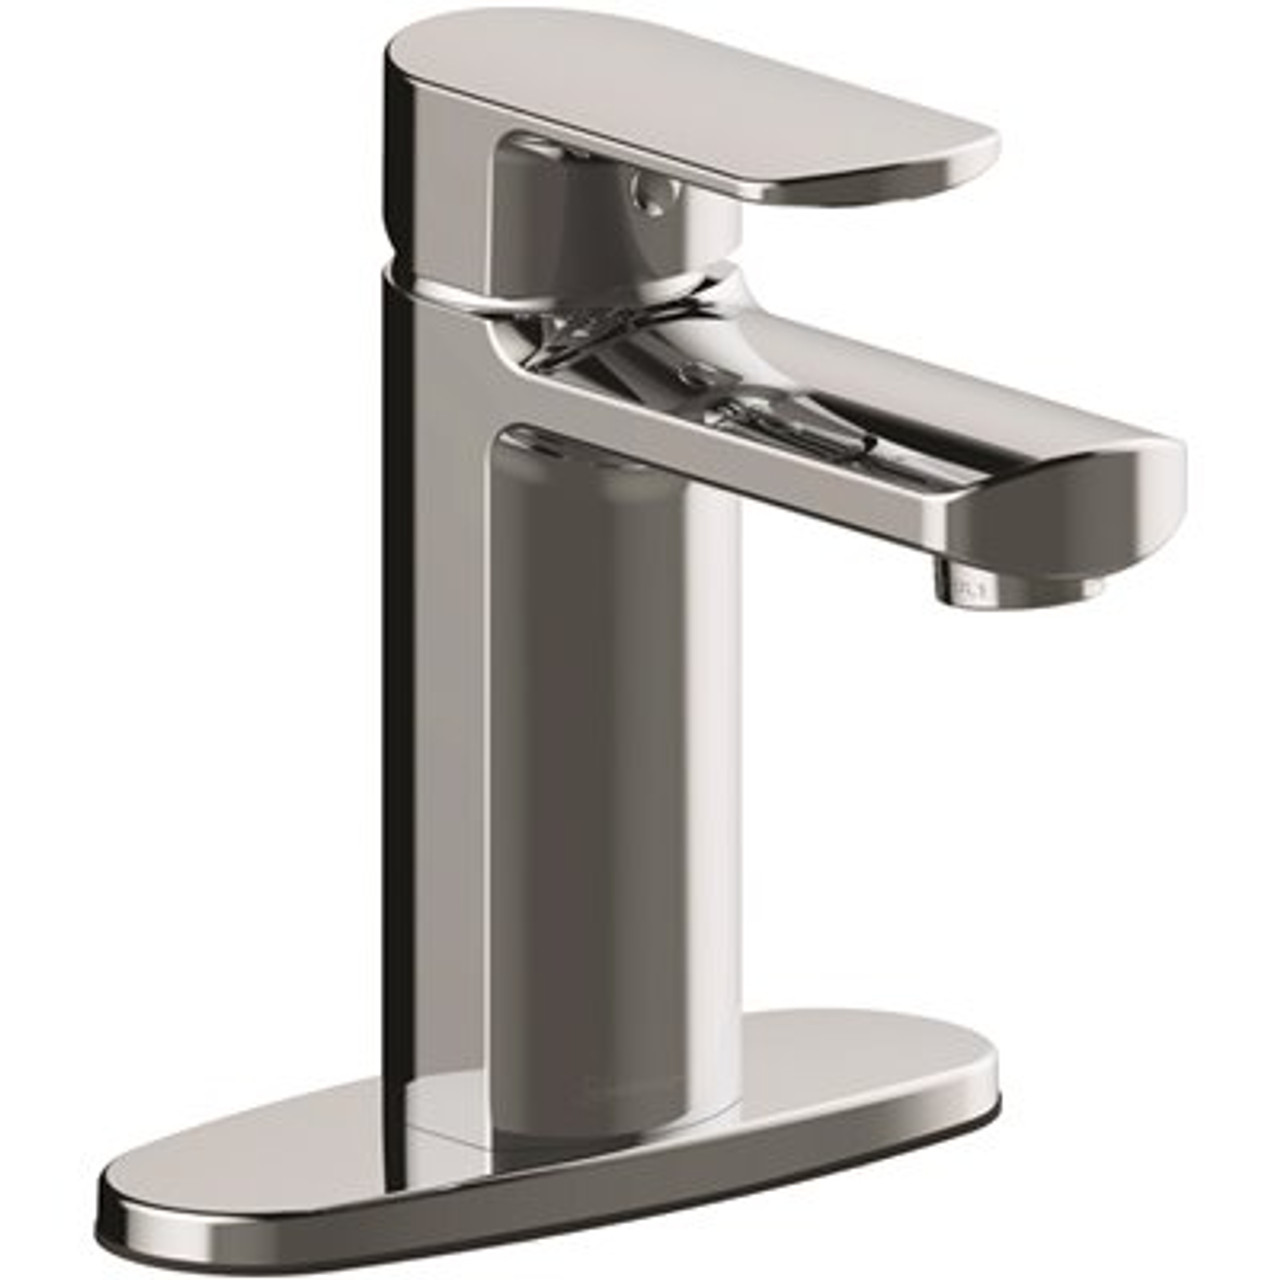 Westwind Single Hole Single-Handle Bathroom Faucet in Chrome with Pop-Up